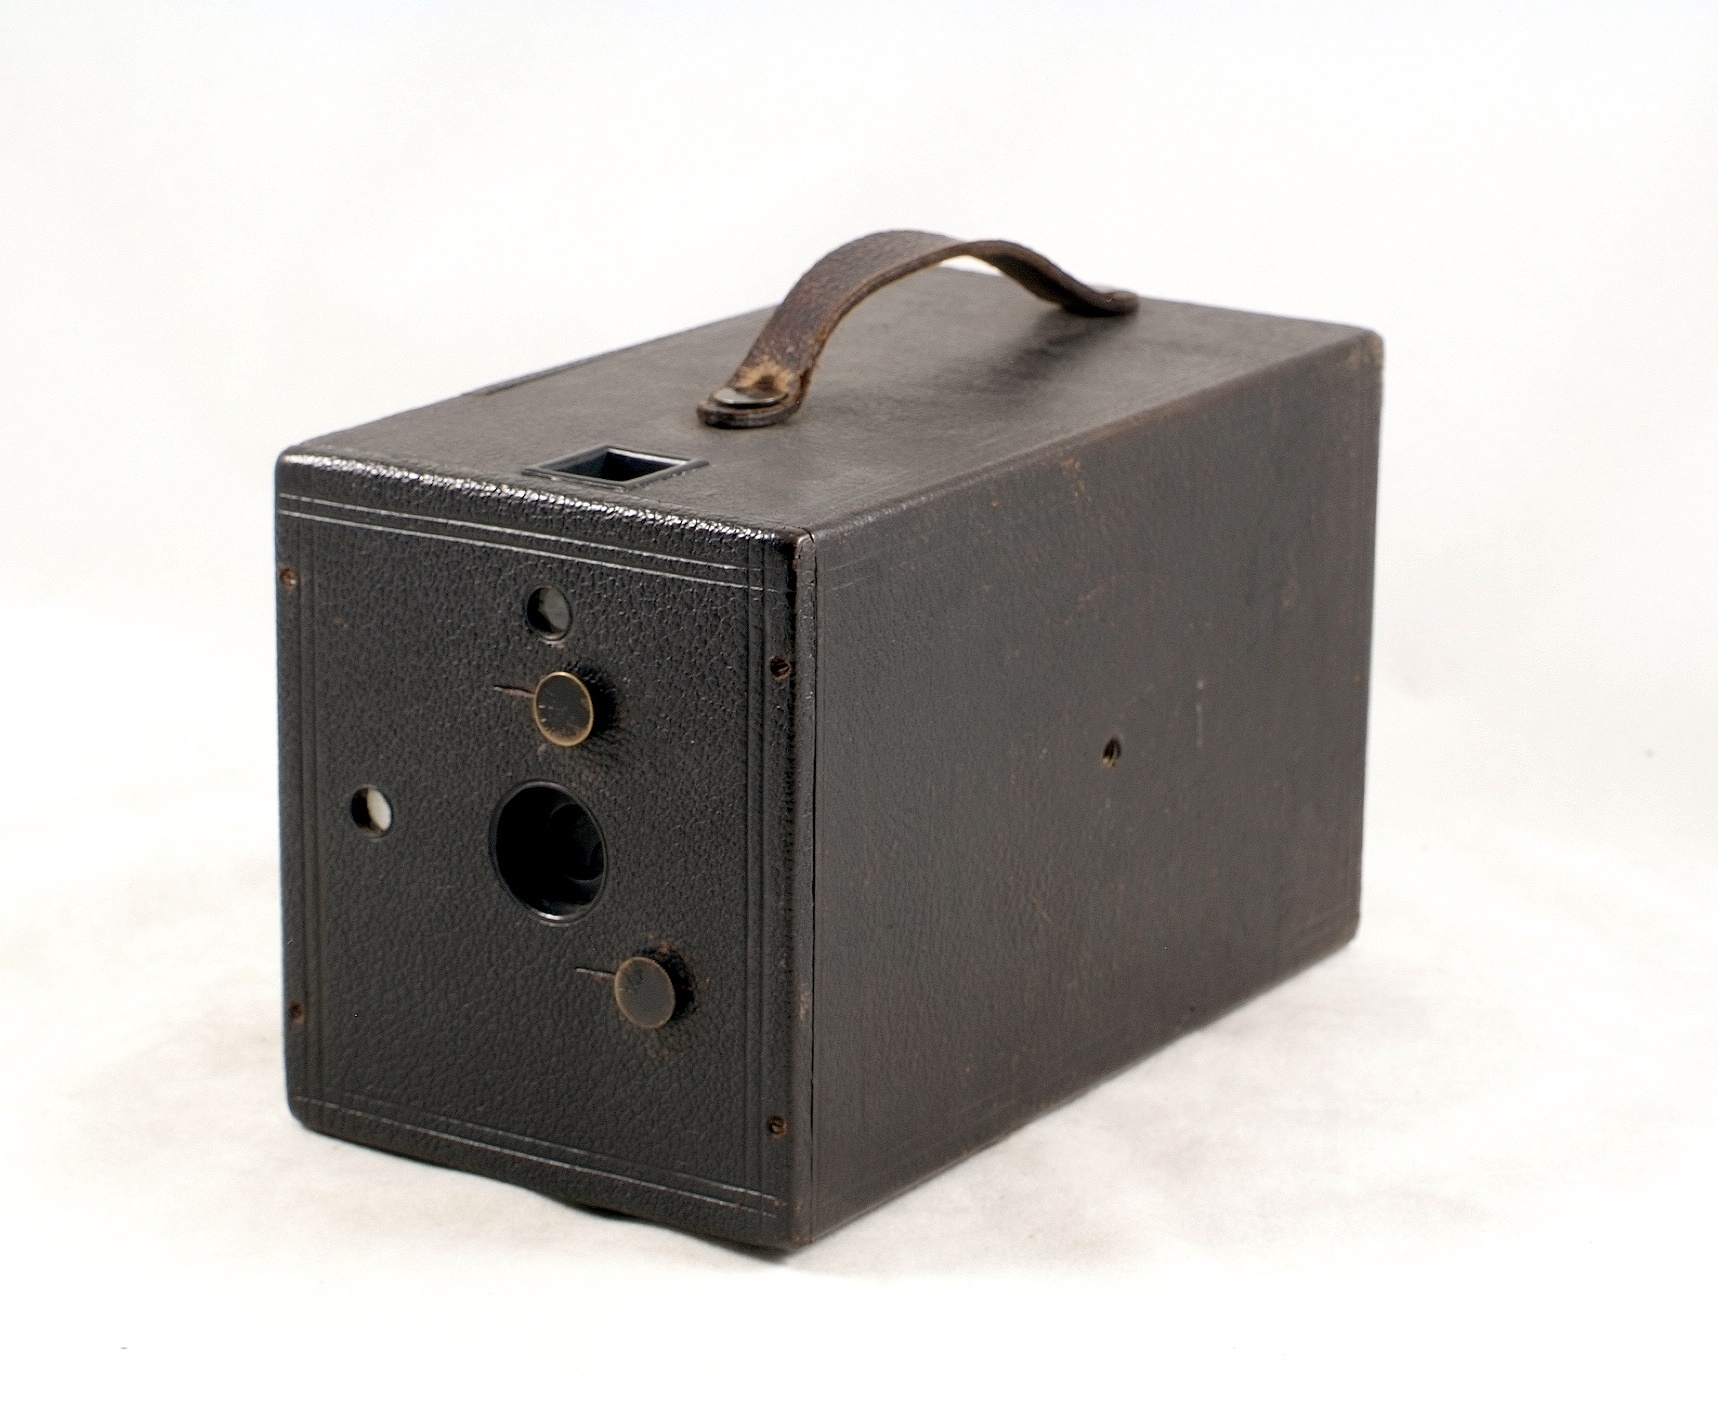 An Uncommon Vive No. 4 5x4 Plate Magazine Camera - Image 3 of 5